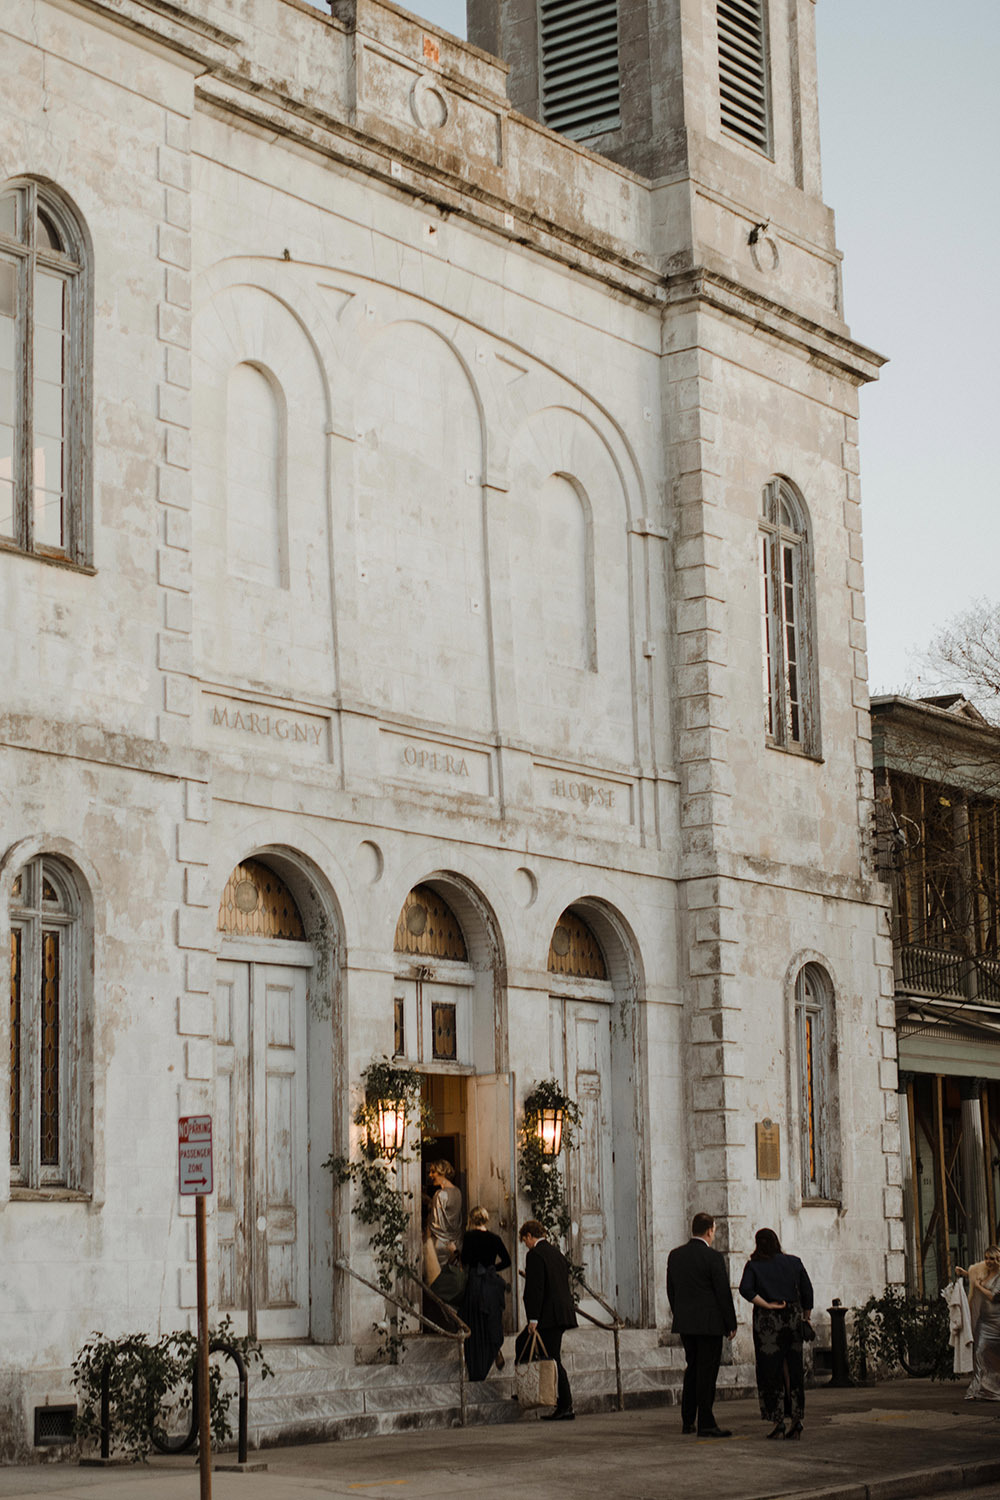 The Marigny Opera House in New Orleans.